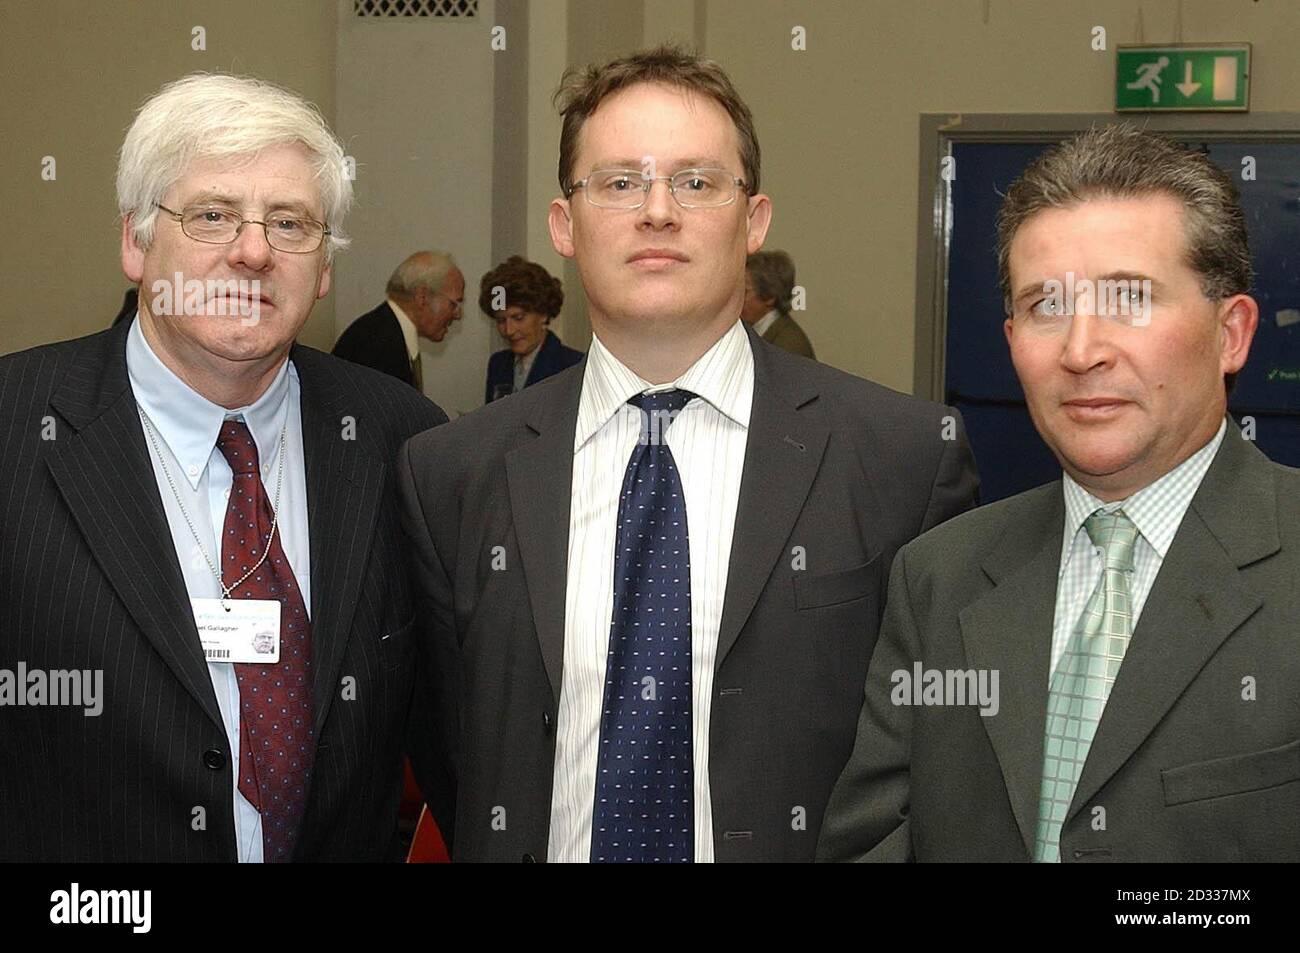 Michael Gallagher (left) whose son was killed in the Omagh bomb, Julian Robertson (centre) the chairman of the Conservative Party of Northern Ireland, and Victor Barker, who also lost a son in Omagh, at a fringe meeting on Omagh at the Conservative Party conference in Blackpool. Stock Photo